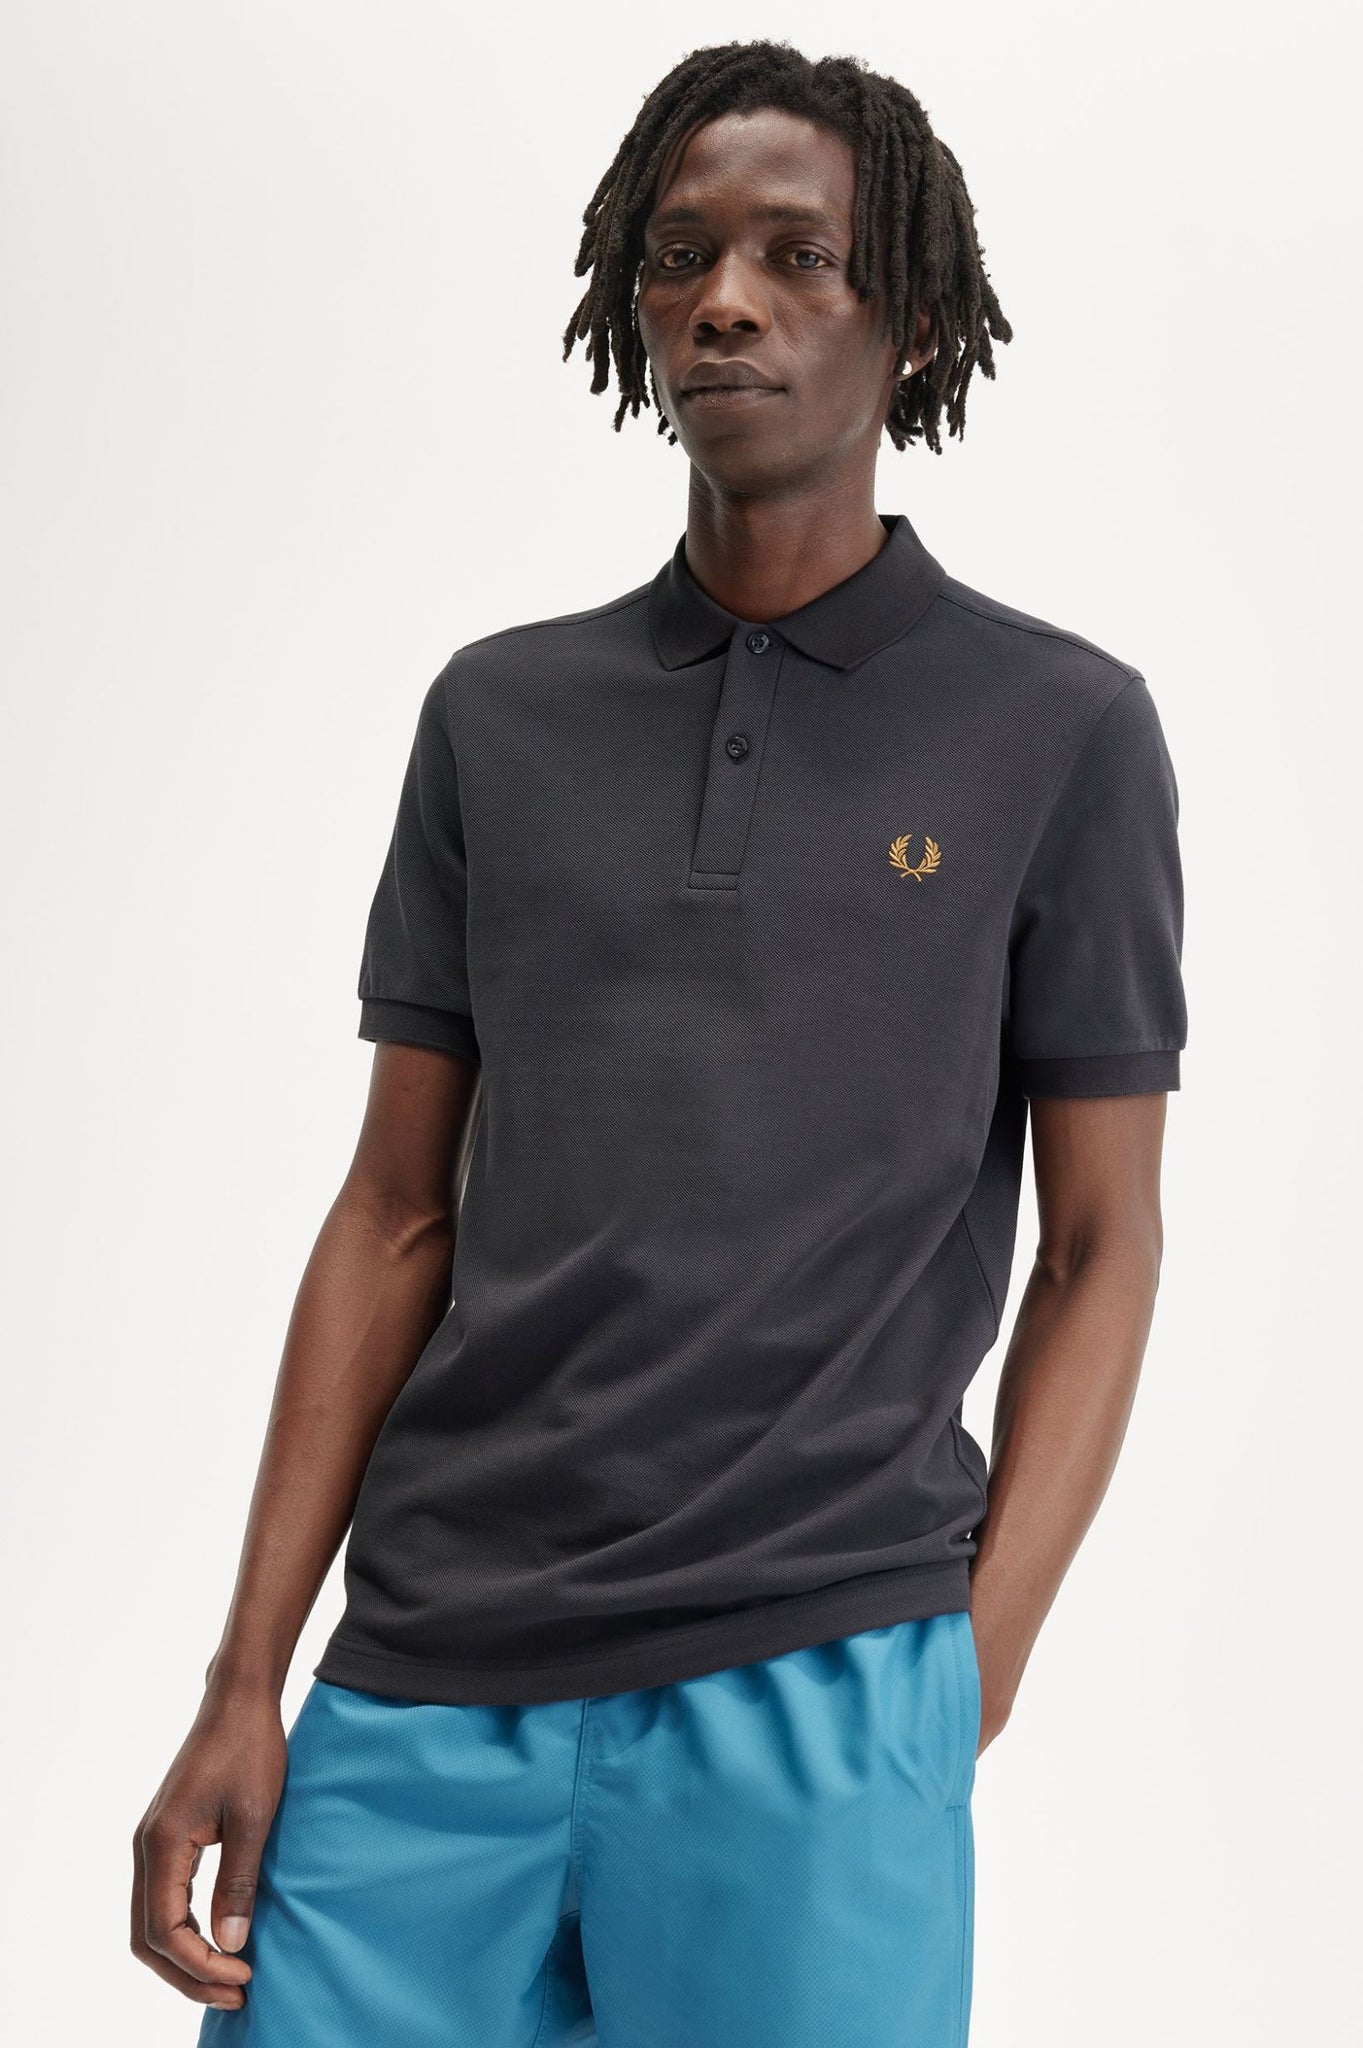 Polo Fred Perry M6000 Gris Ancla Caramelo Oscuro